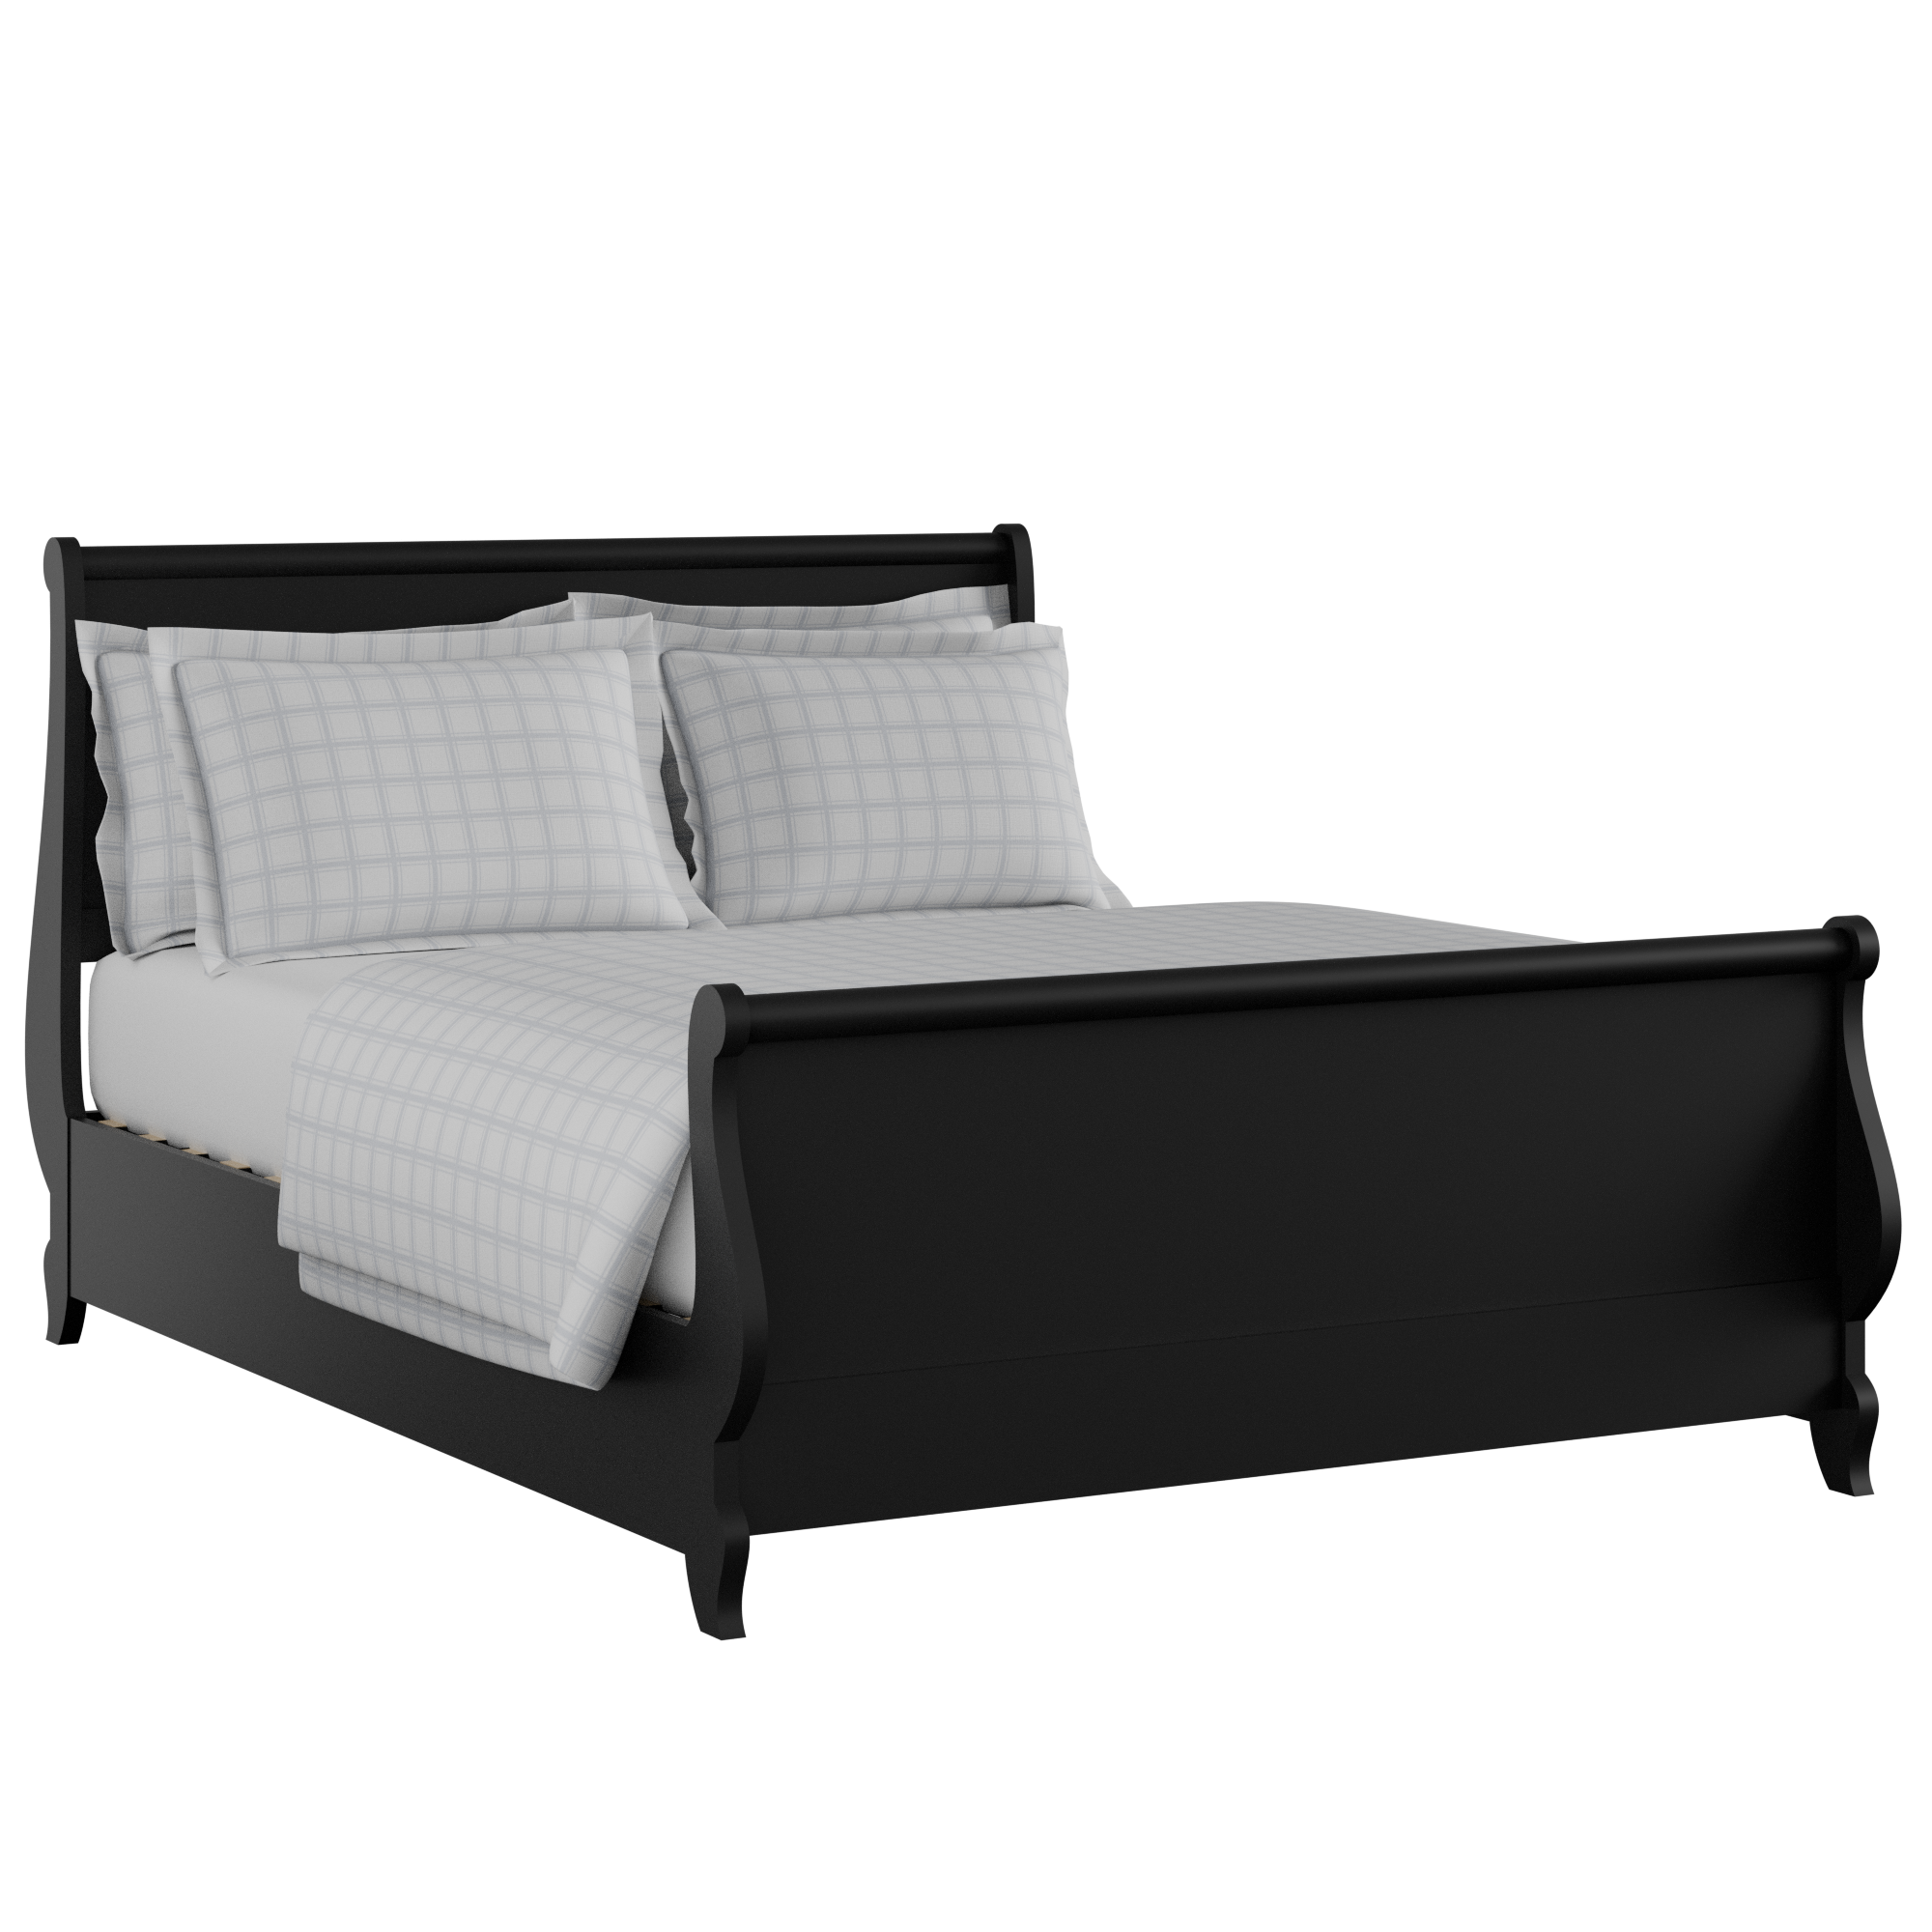 Elliot Painted painted wood bed in black with Juno mattress